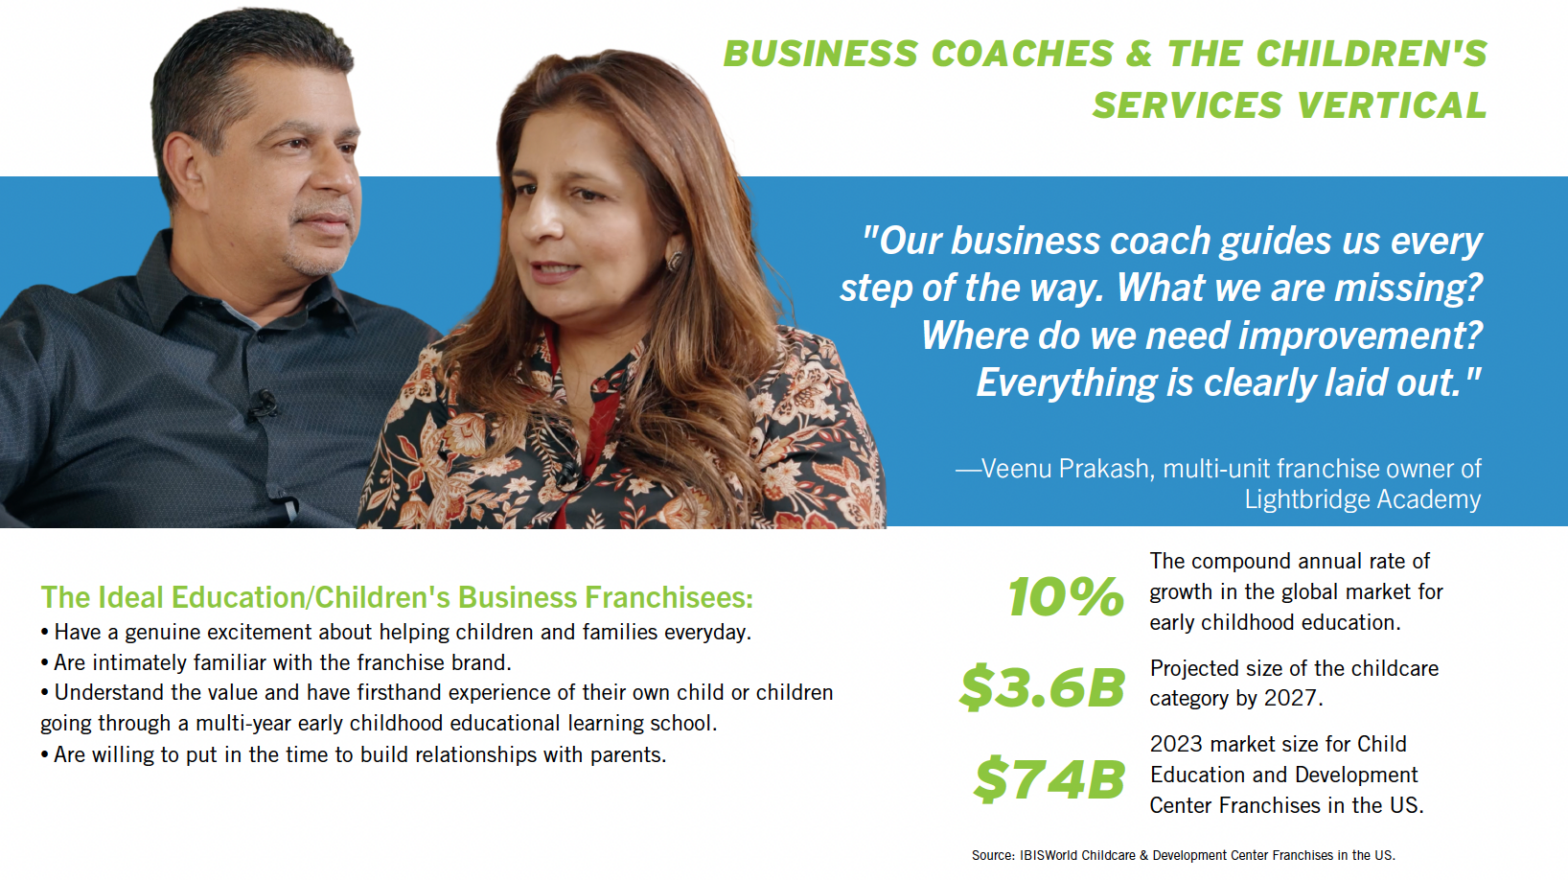 The Benefits of Working with a Dedicated Business Coach for Your Franchise